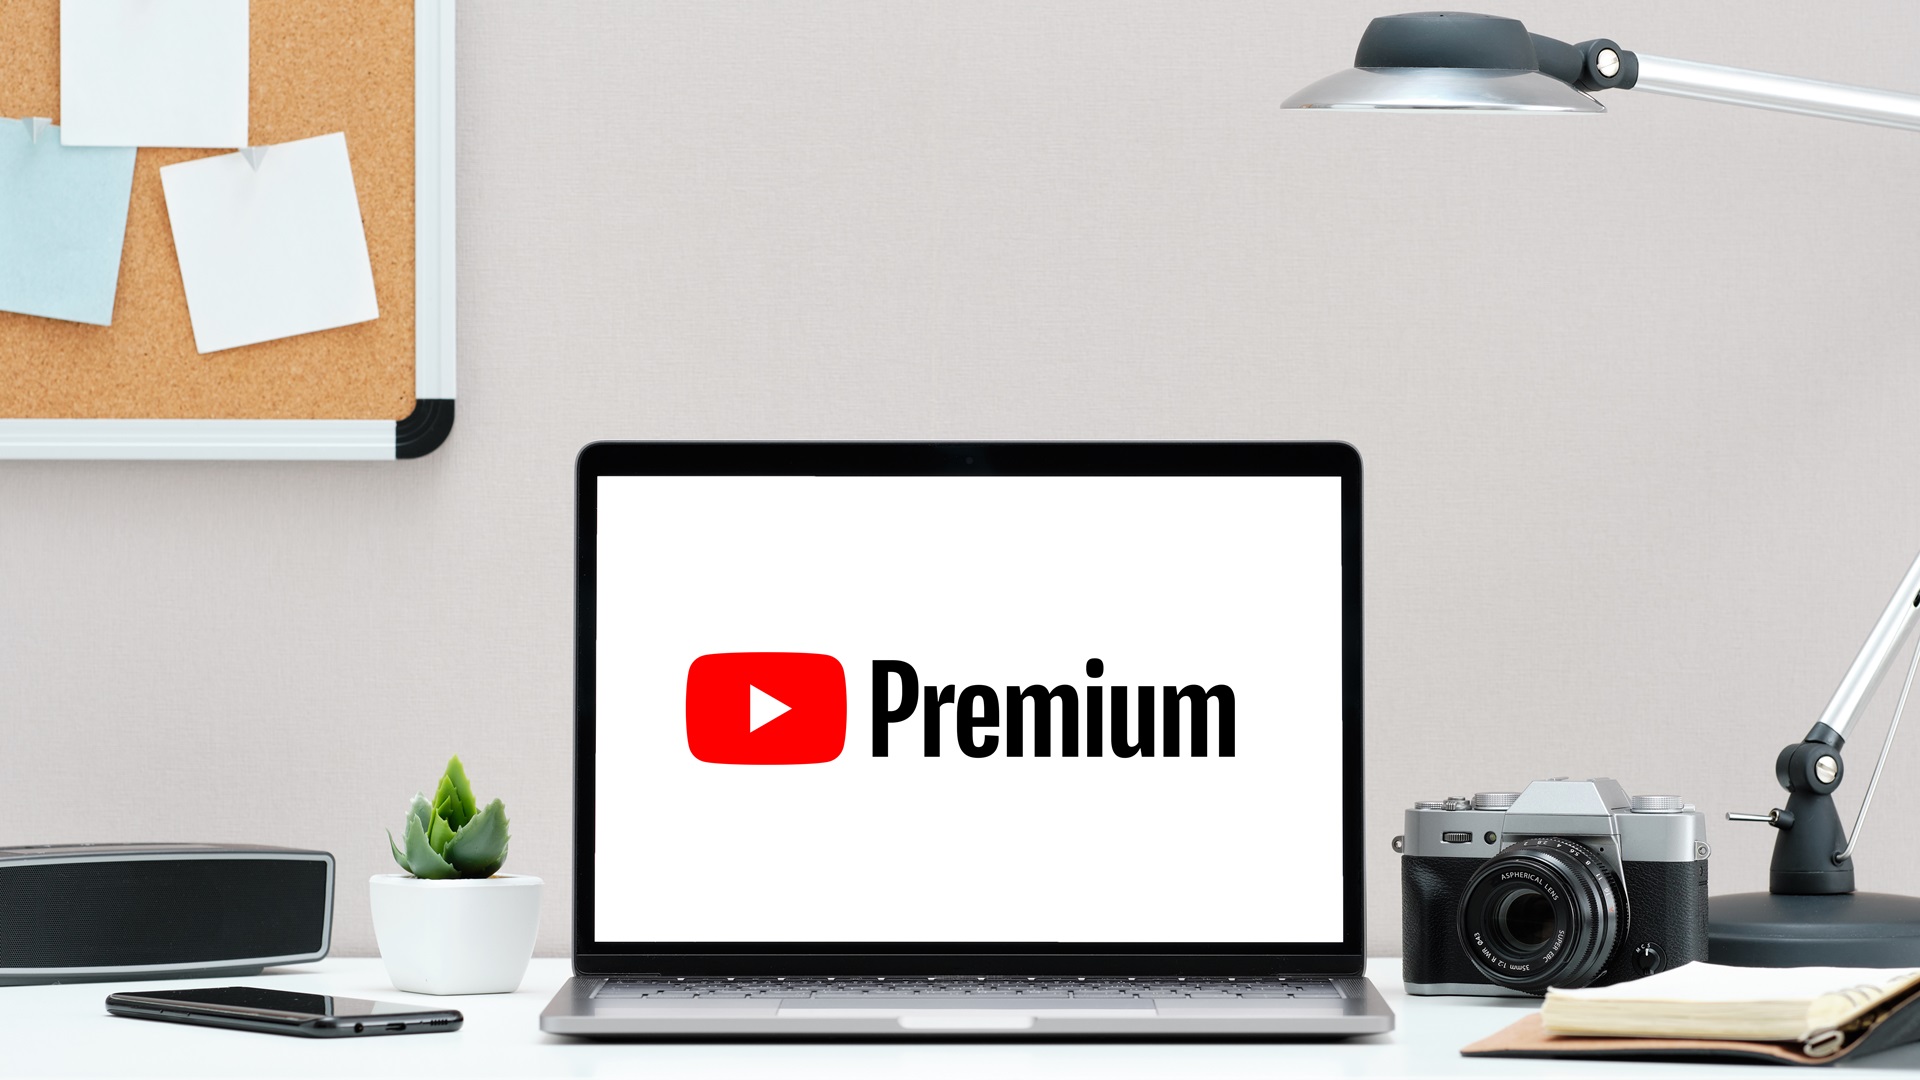 Get YouTube Premium without ads for only 35p per month! Here’s a tutorial how to do it.